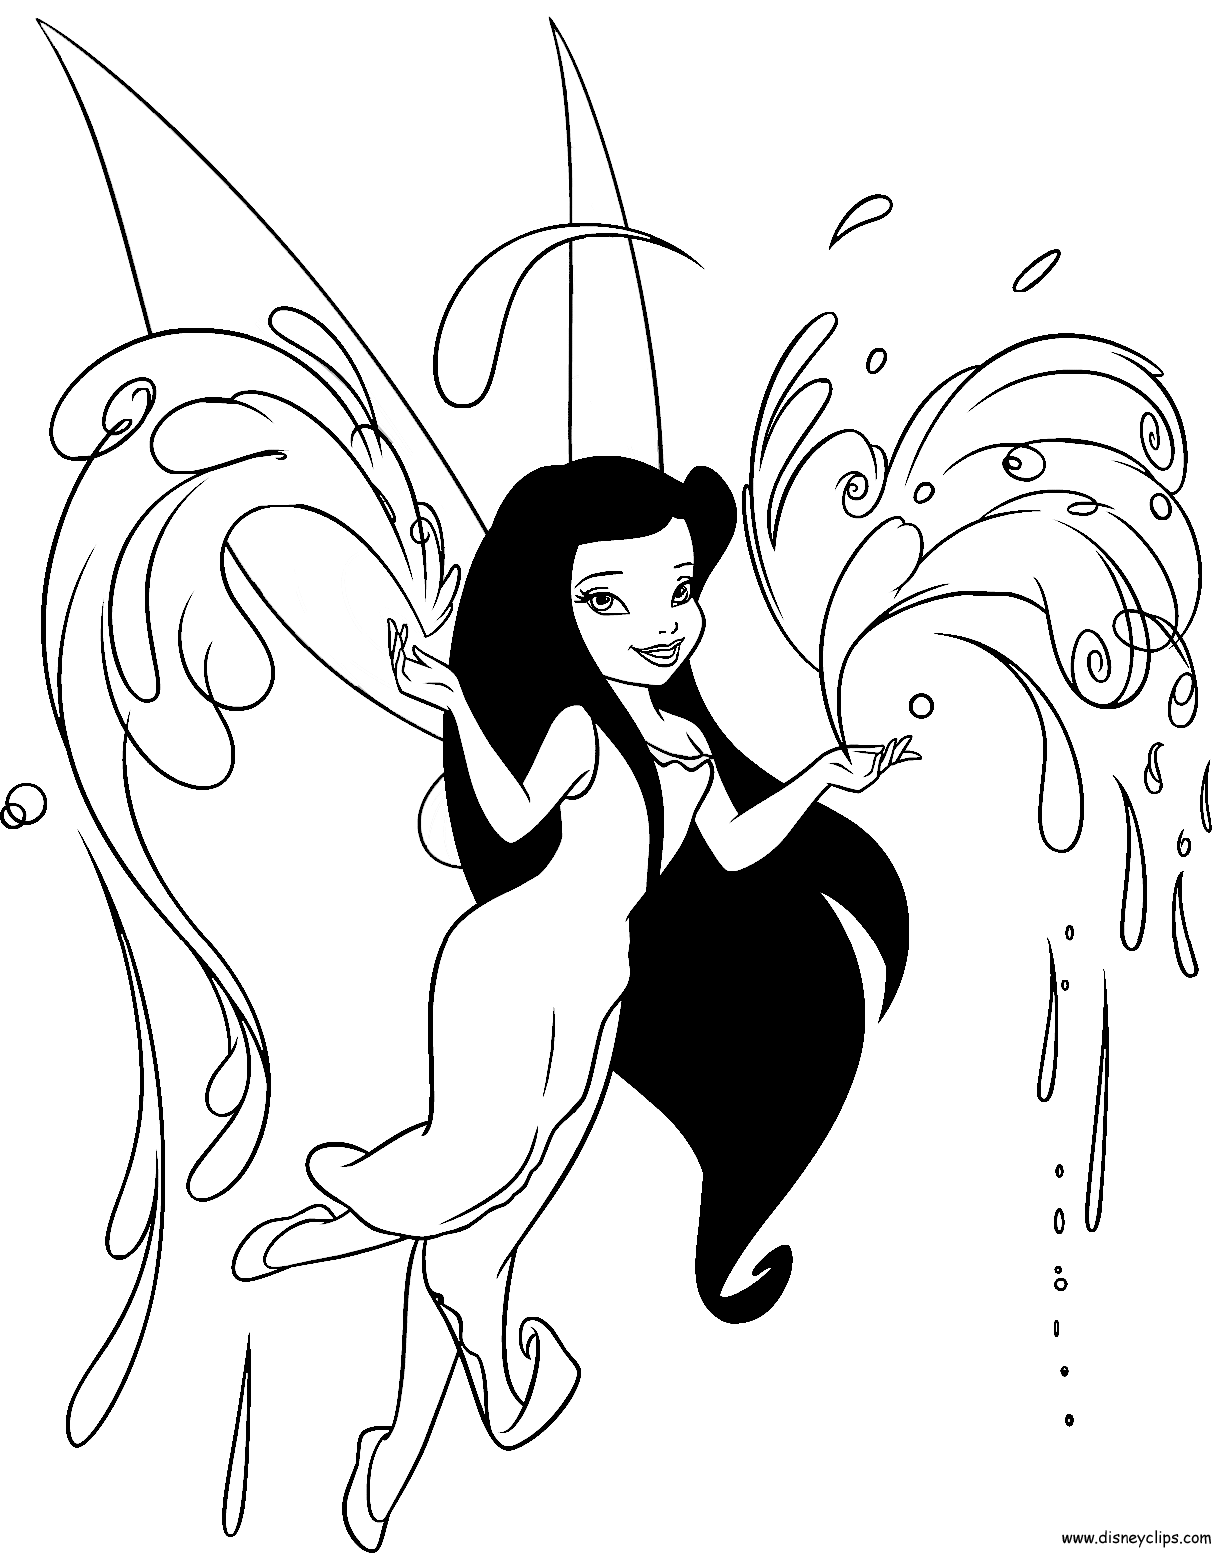 Download Disney Fairies Coloring Pages (3) | Disneyclips.com